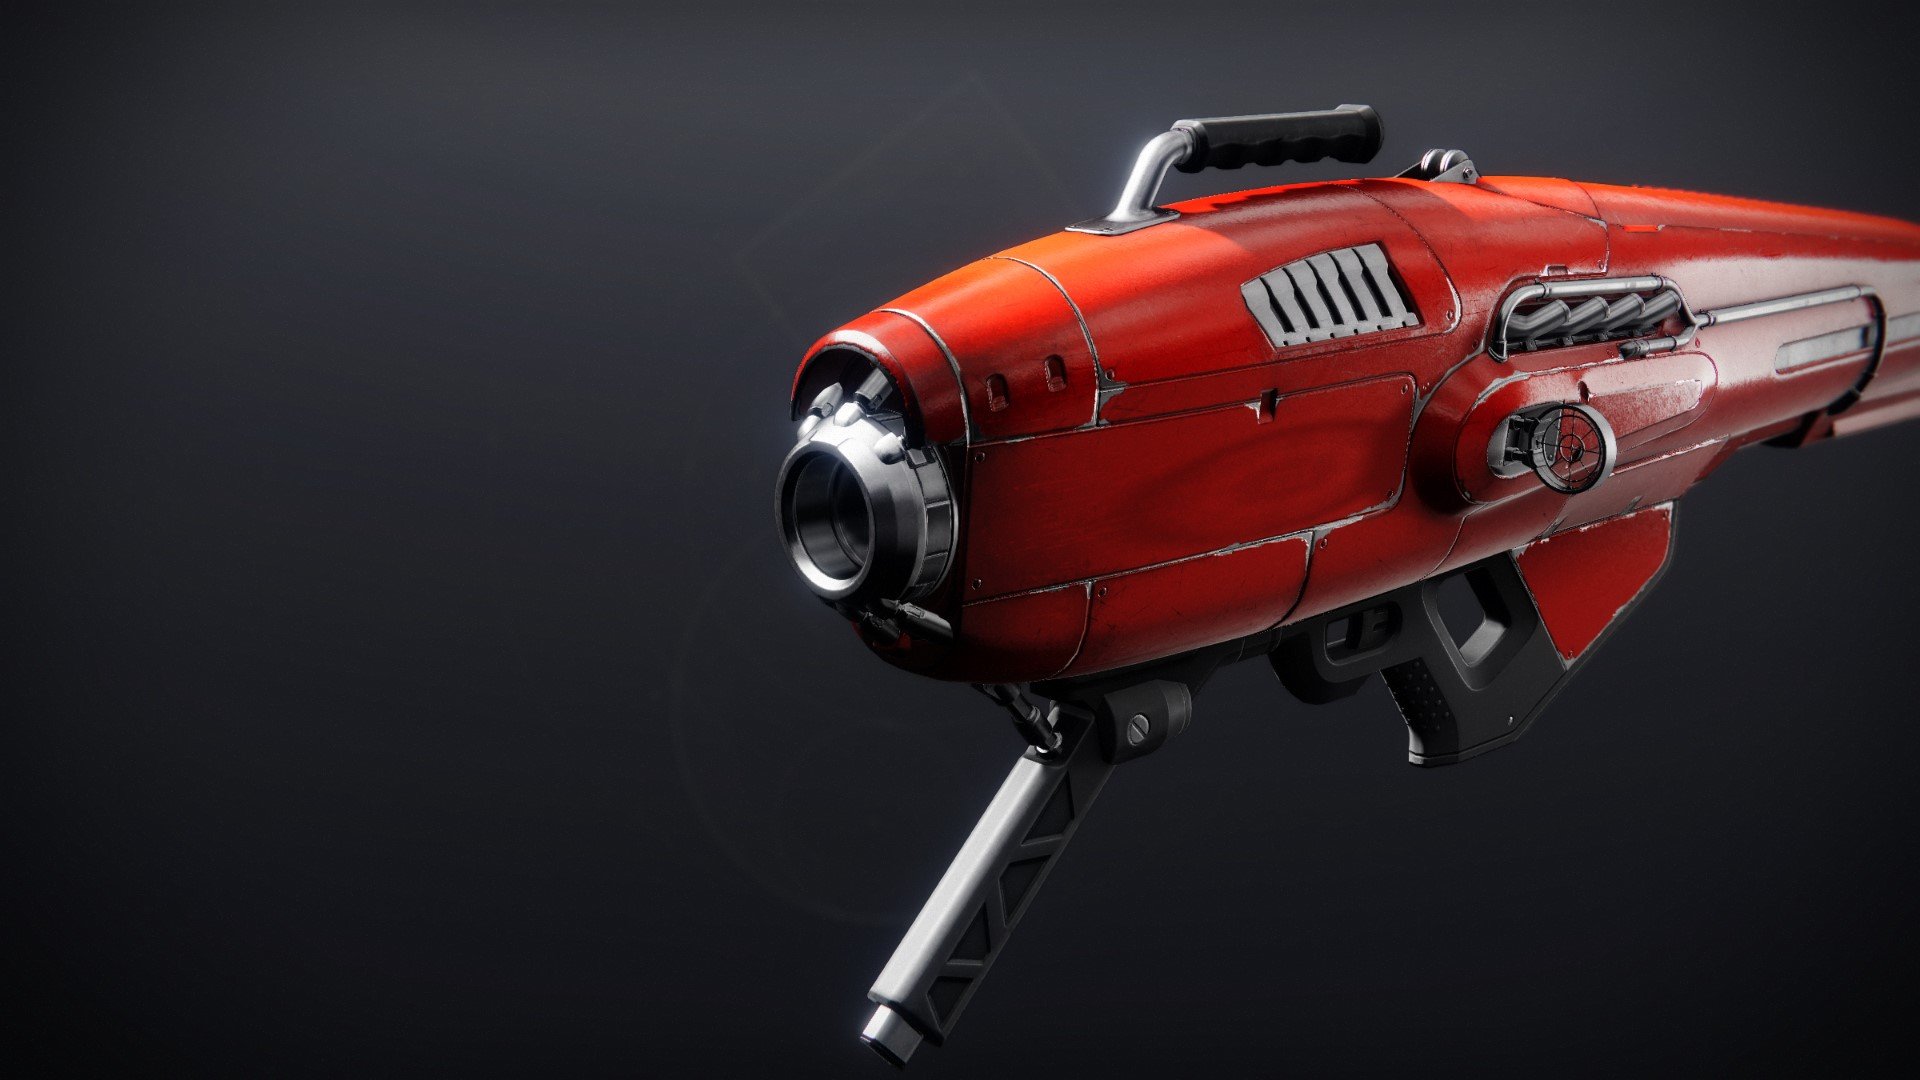 The Hothead - Rocket Launcher Destiny 2 Season Of The Lost Weapons